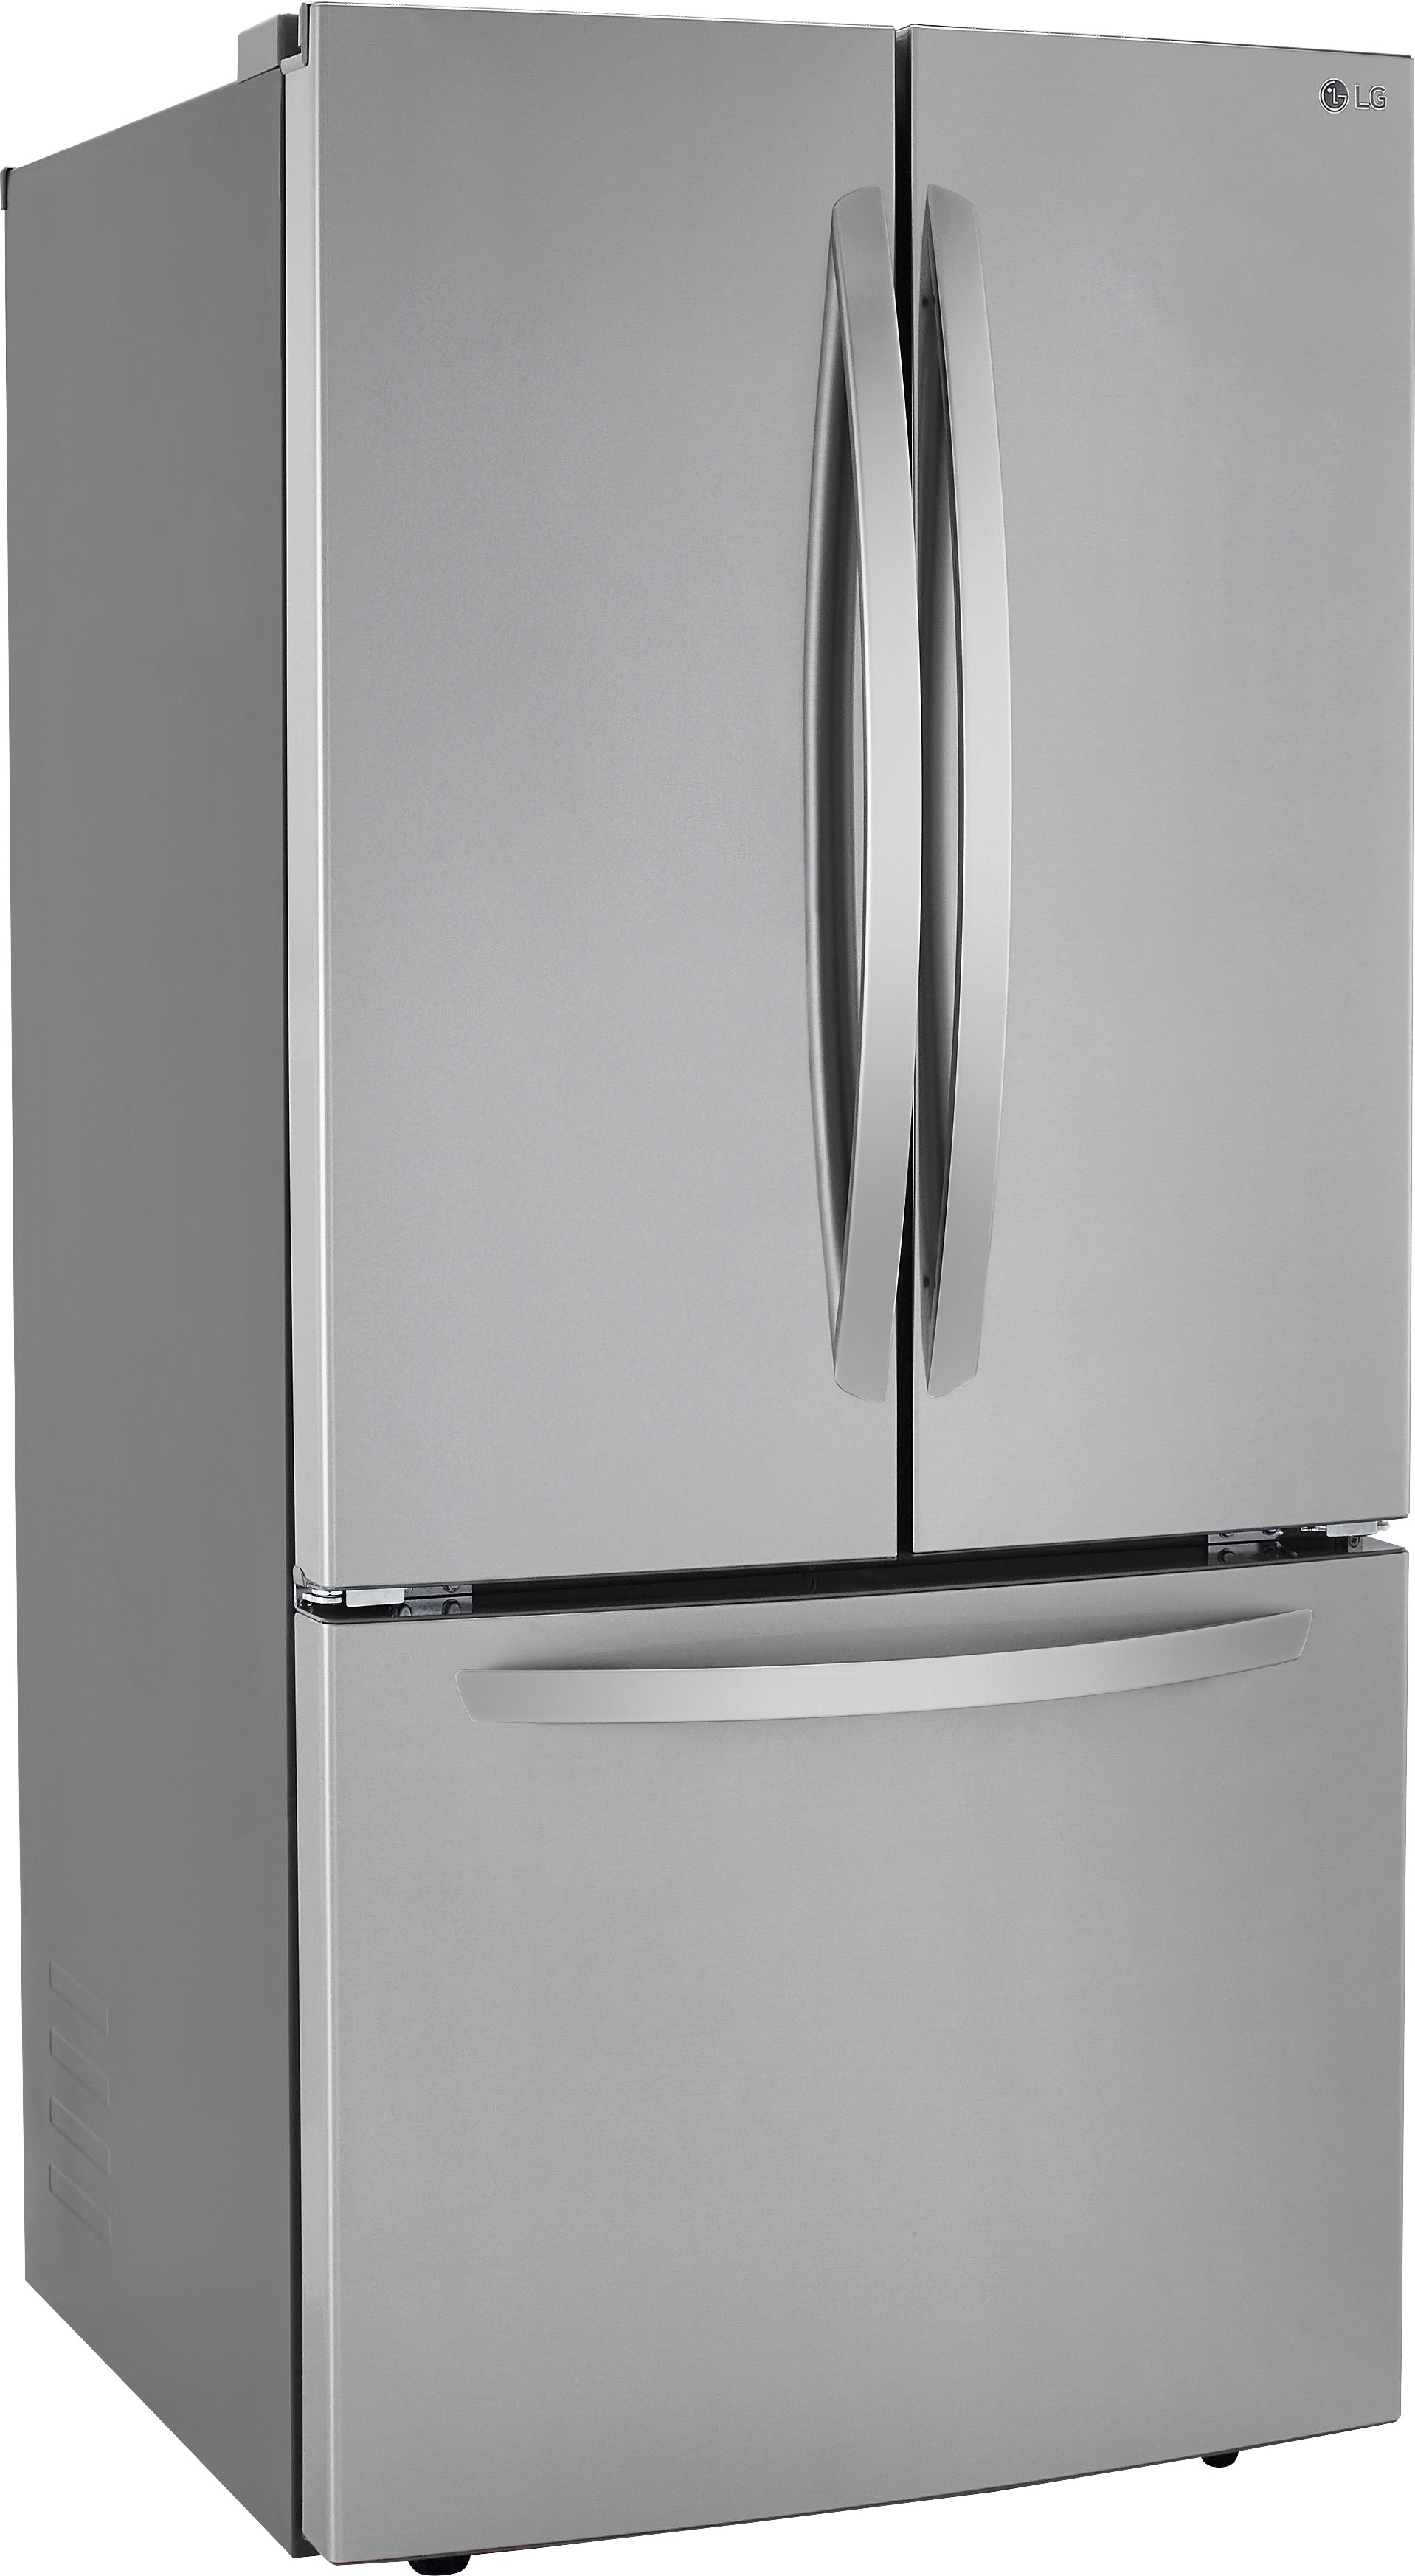 LG 25.1 Cu. Ft. French Door Refrigerator with Ice Maker Stainless Steel ...